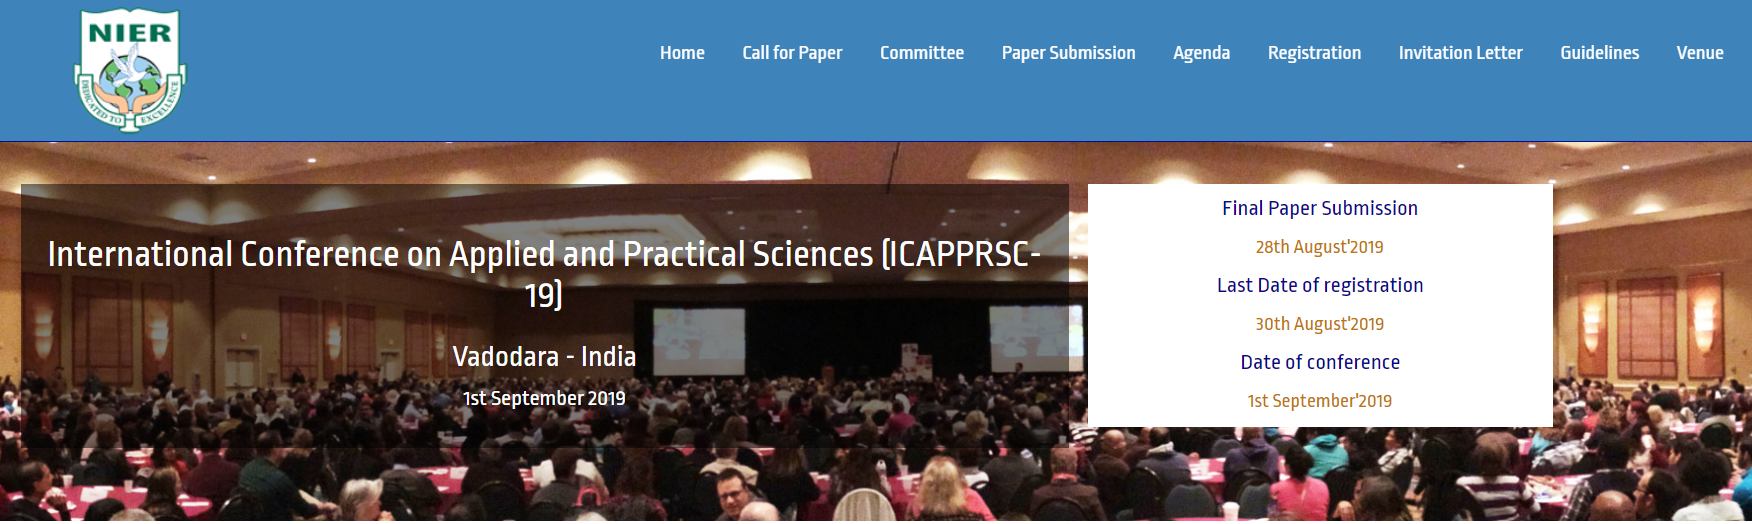 International Conference on Applied and Practical Sciences (ICAPPRSC-19), Vadodara, Gujarat, India